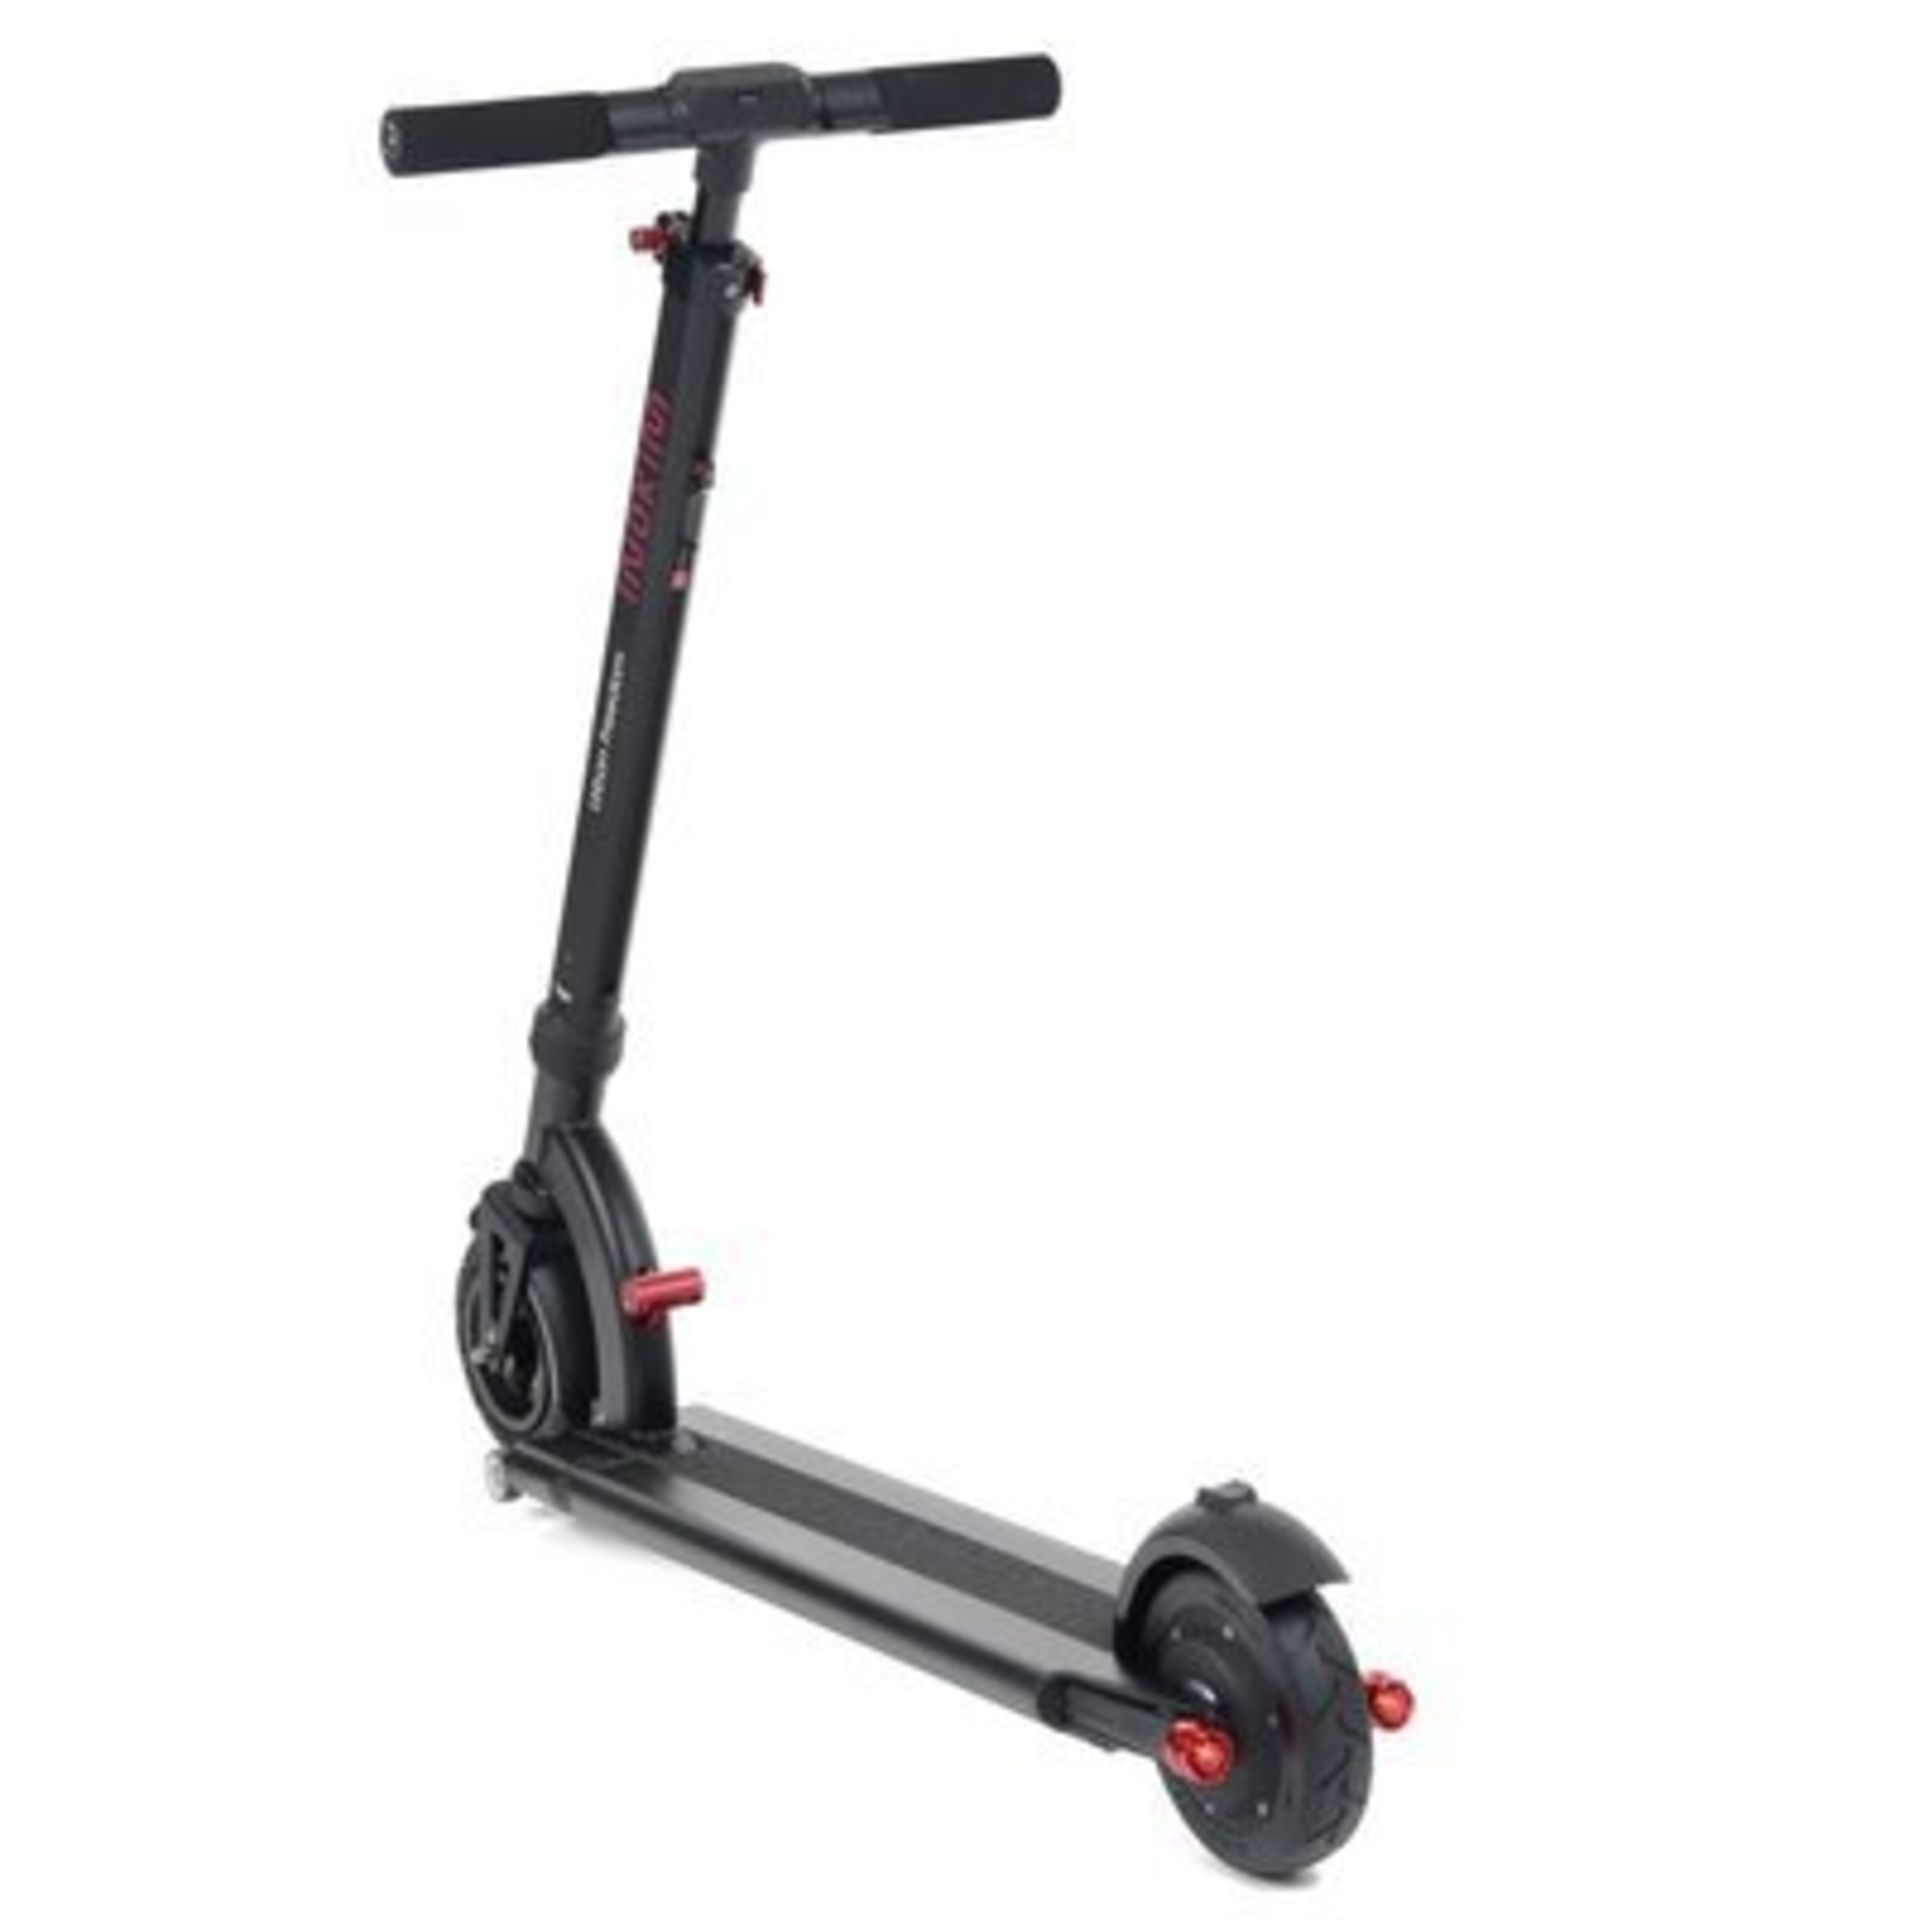 BRAND NEW INOKIM MINI FORCE BLACK 1'SELECTRIC SCOOTER (BLACK) RRP £559 - Image 2 of 4